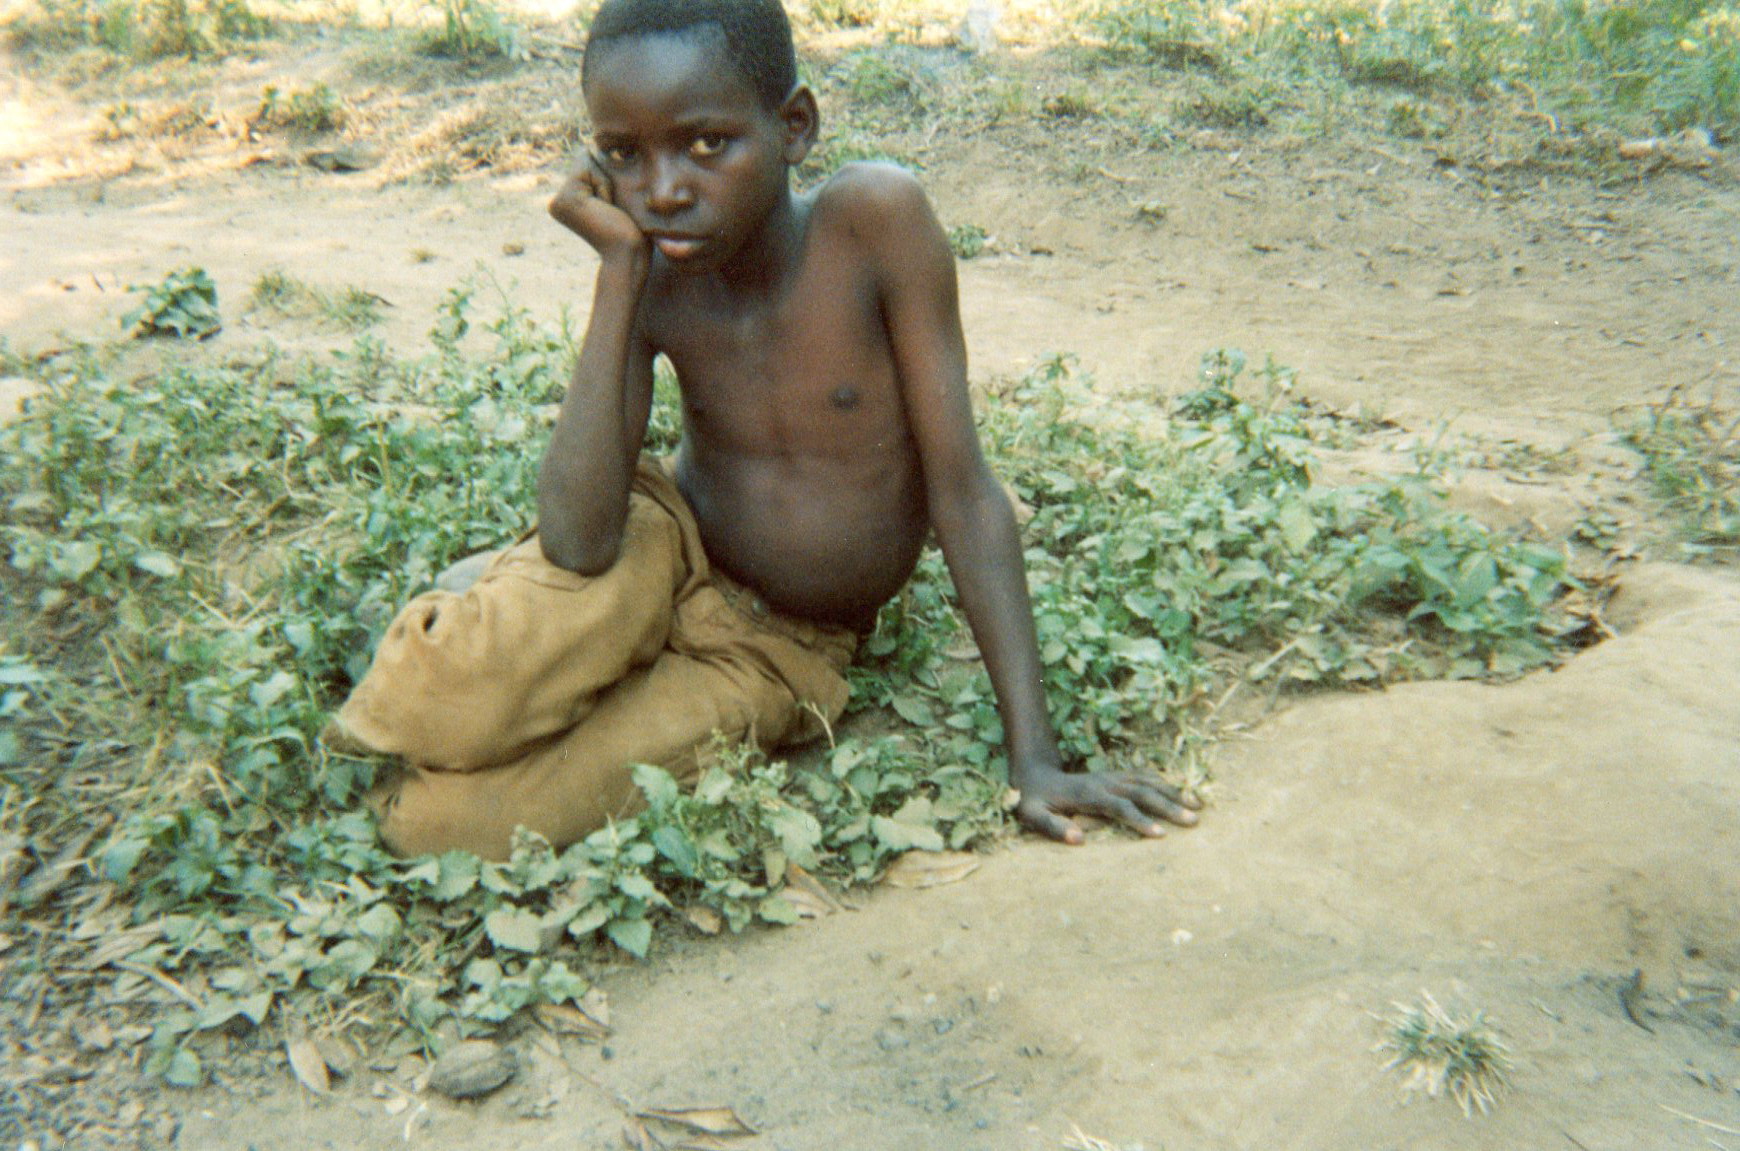  This child who is an orphan has no support or protection in their community.&nbsp; 